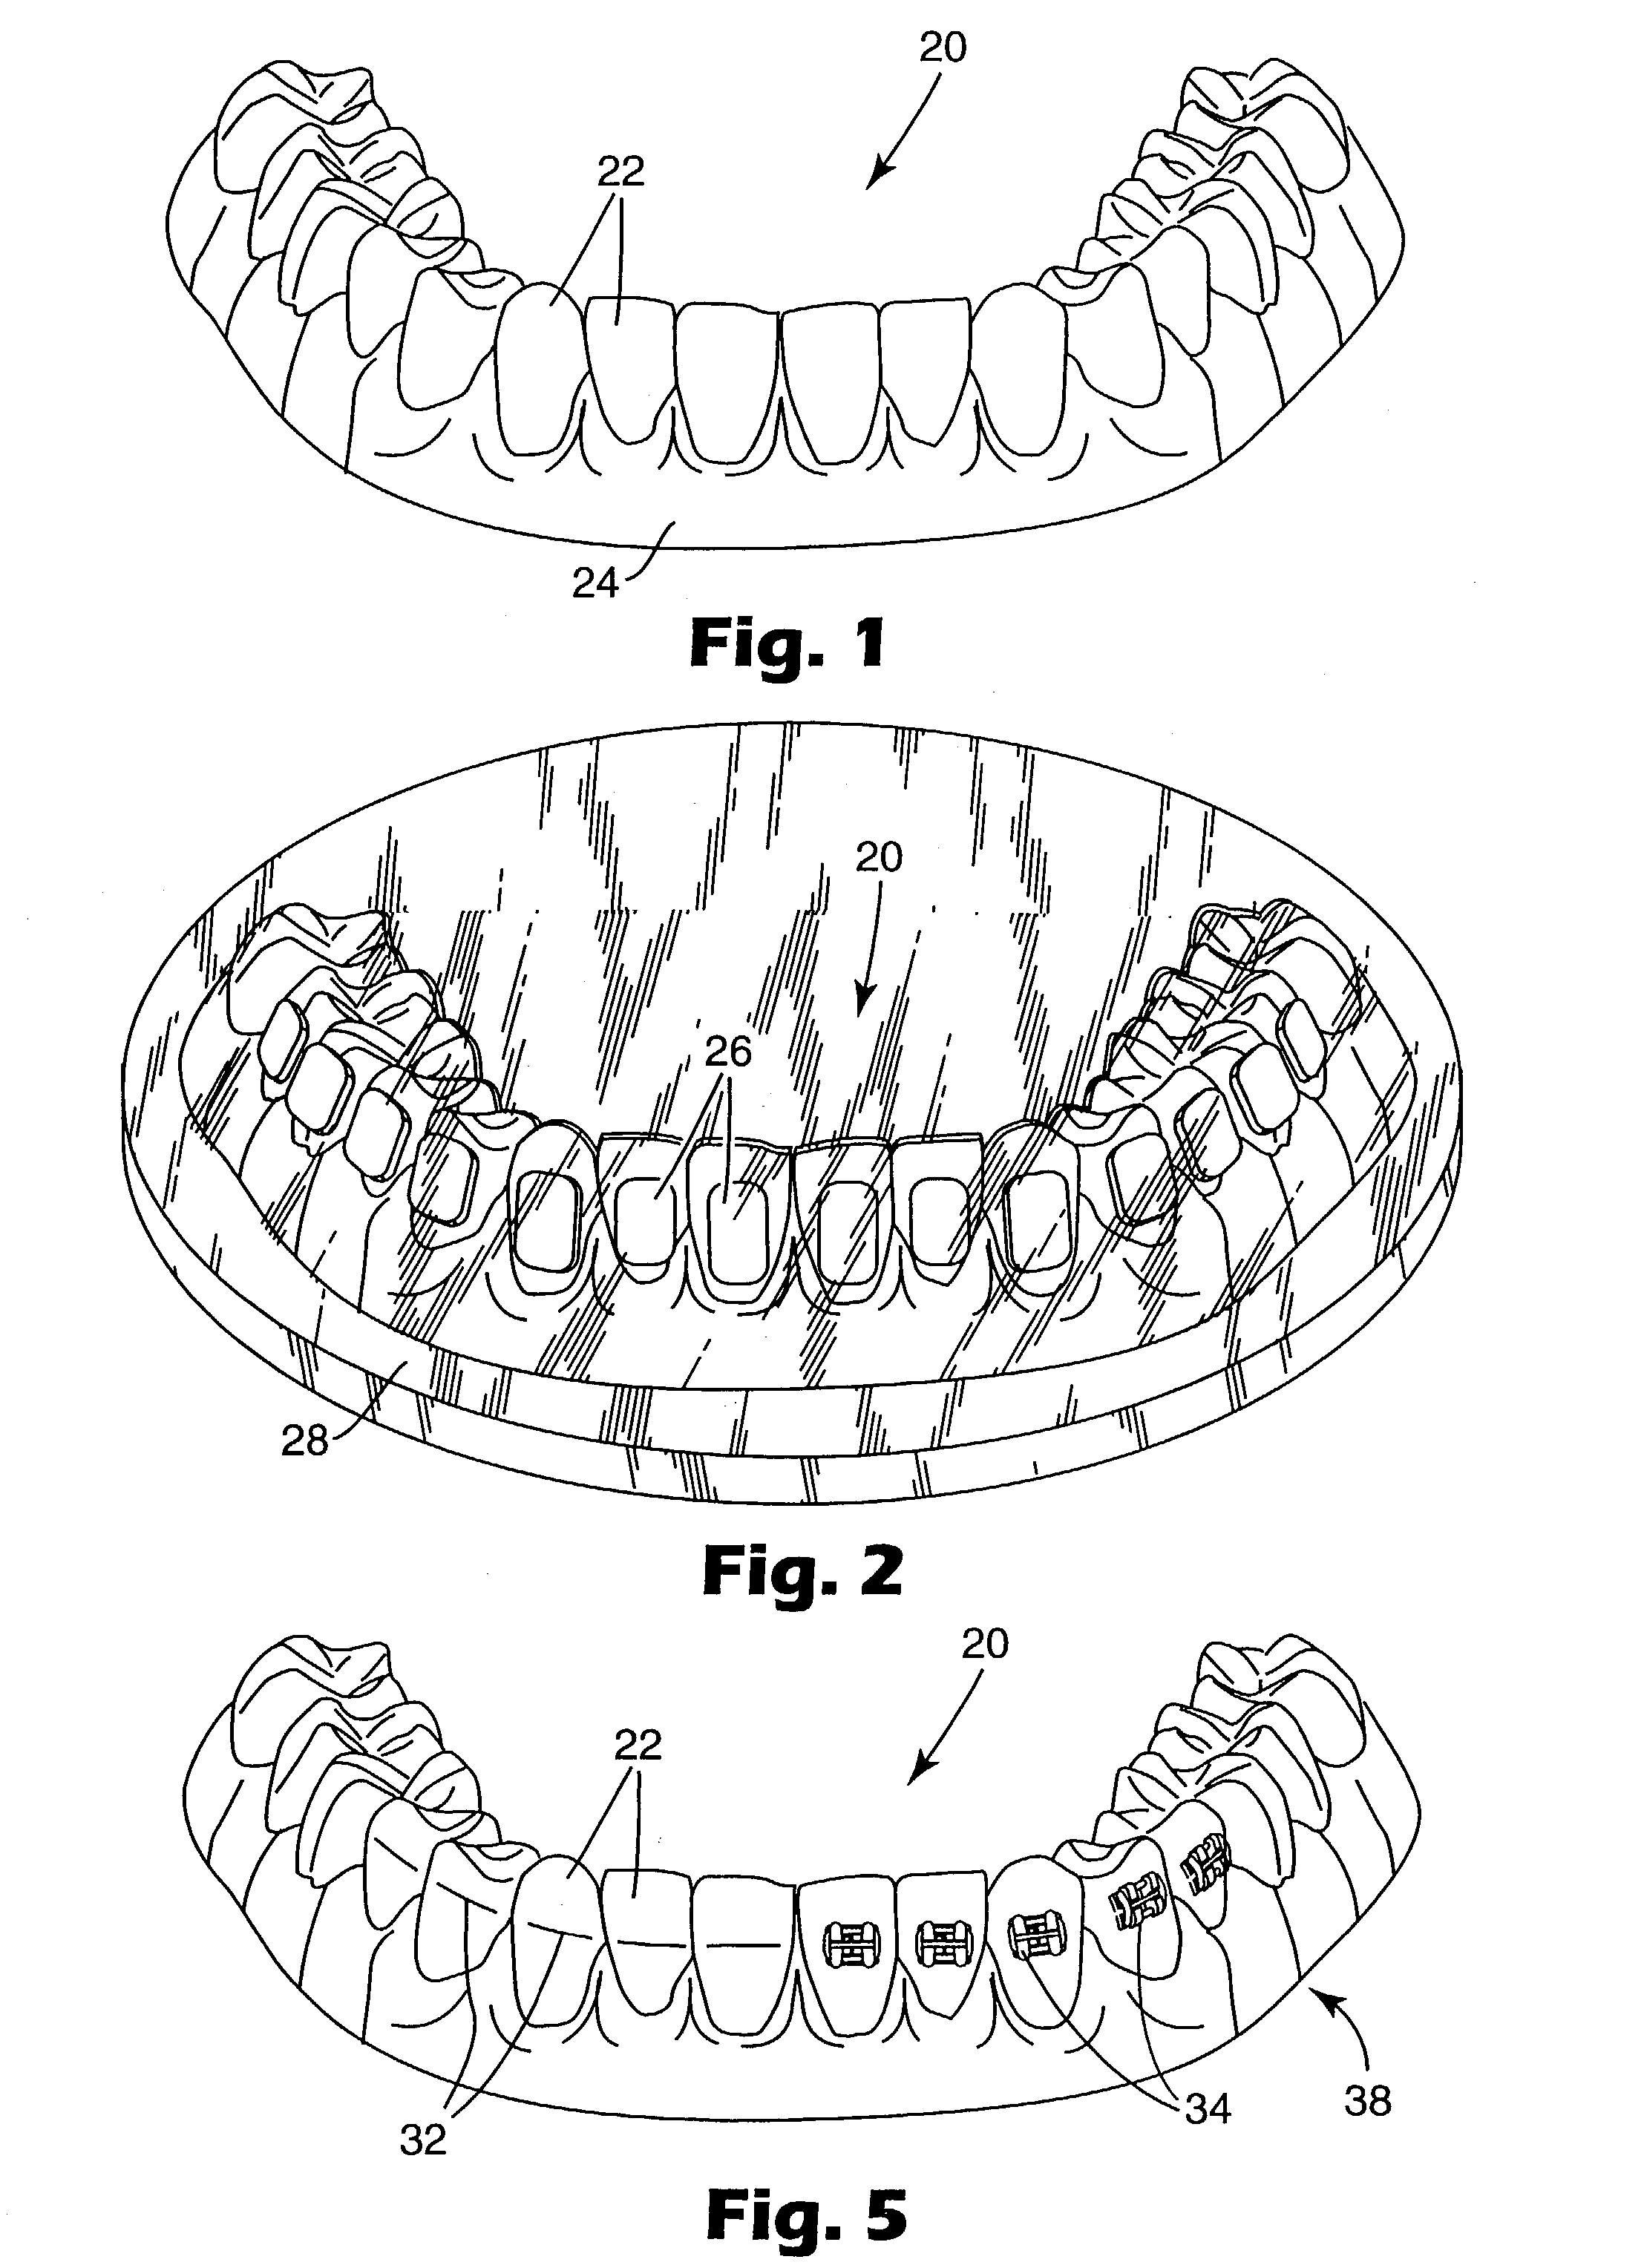 Method and apparatus for indirect bonding of orthodontic appliances